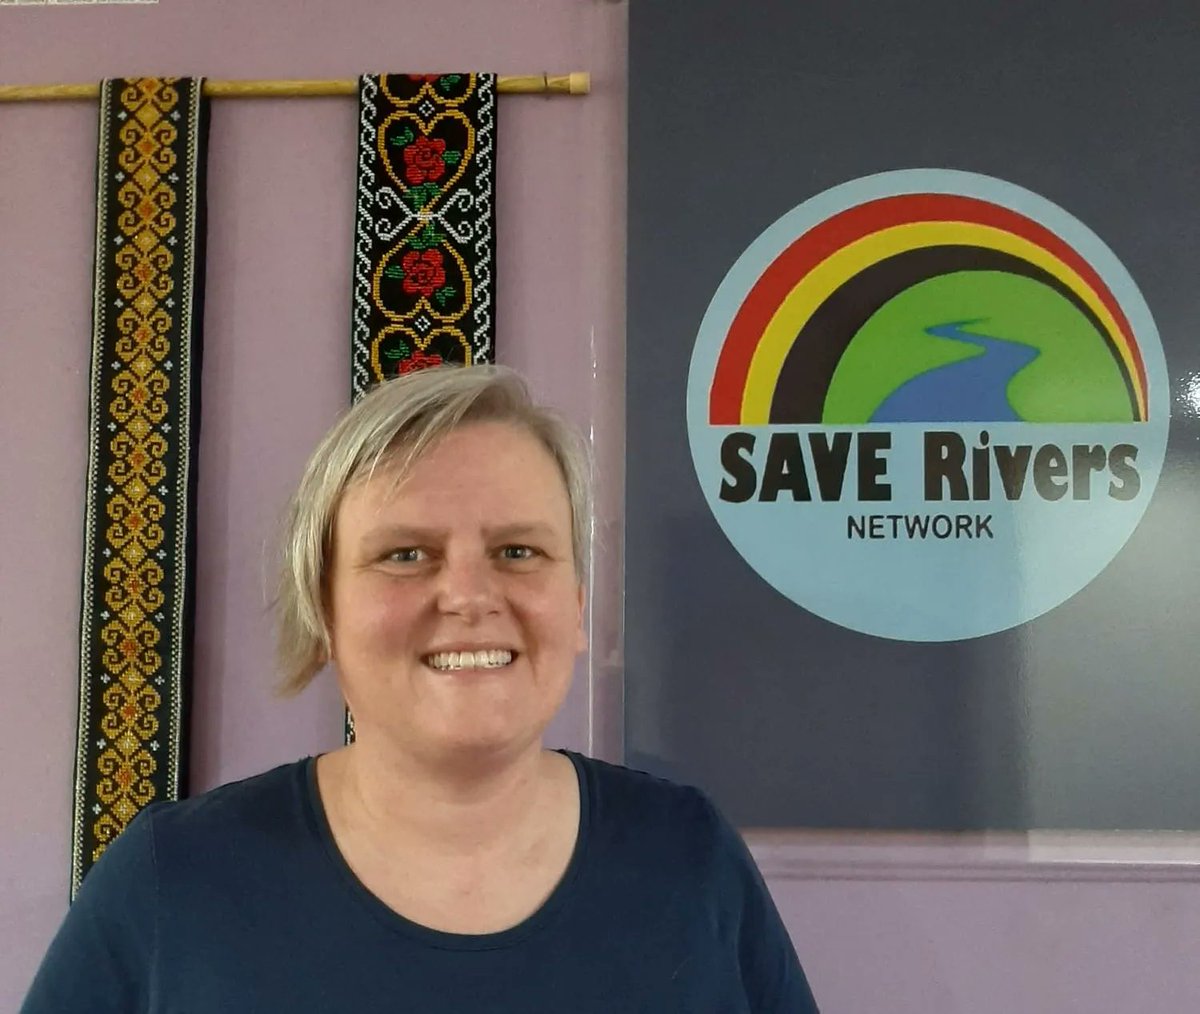 Jenny Weber, Bob Brown Foundation, about Samling withdrawing their defamation suit against SAVE Rivers: “The world has been watching while a Sarawak logging company has attempted to silence SAVE Rivers. It has not worked.” #StopTheSLAPP #StopTheChop
buff.ly/469Wc5n